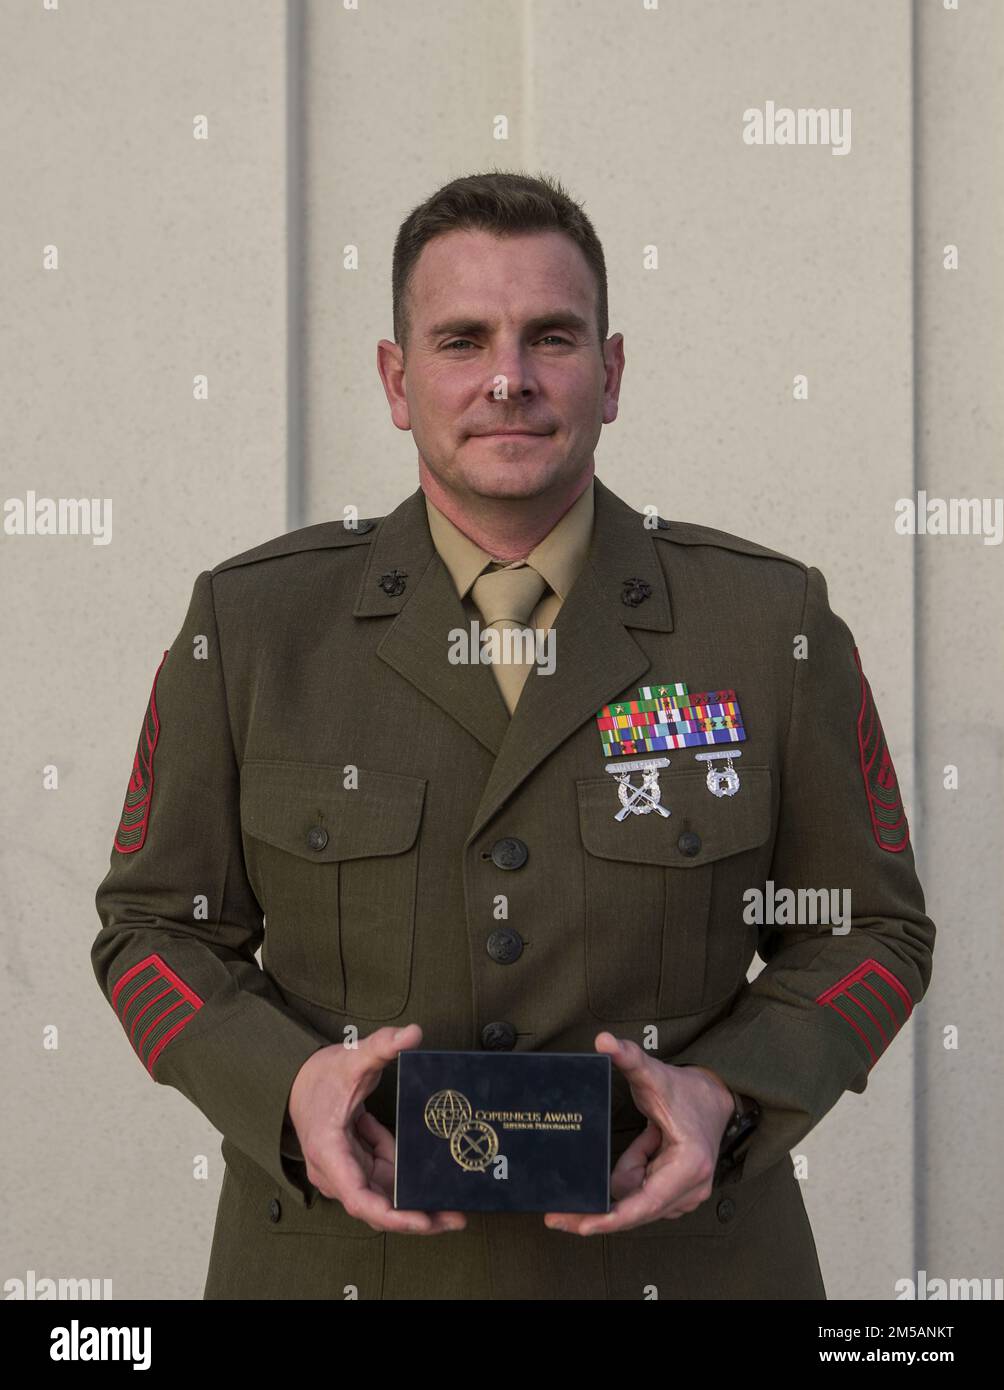 U.S. Marine Corps Master Sgt. Zachary Williams, a ground electronics systems maintenance Marine with the 15th Marine Expeditionary Unit, poses for a photo after receiving the 2022 Copernicus Award during the Armed Forces Communications and Electronics Association Western Conference and Exposition in San Diego, California, Feb. 16, 2022. The Copernicus Award honors recipients for their consistent and superior performance in their command, control, communications, computers and intelligence (C4I)/ information technology-related job fields. Stock Photo